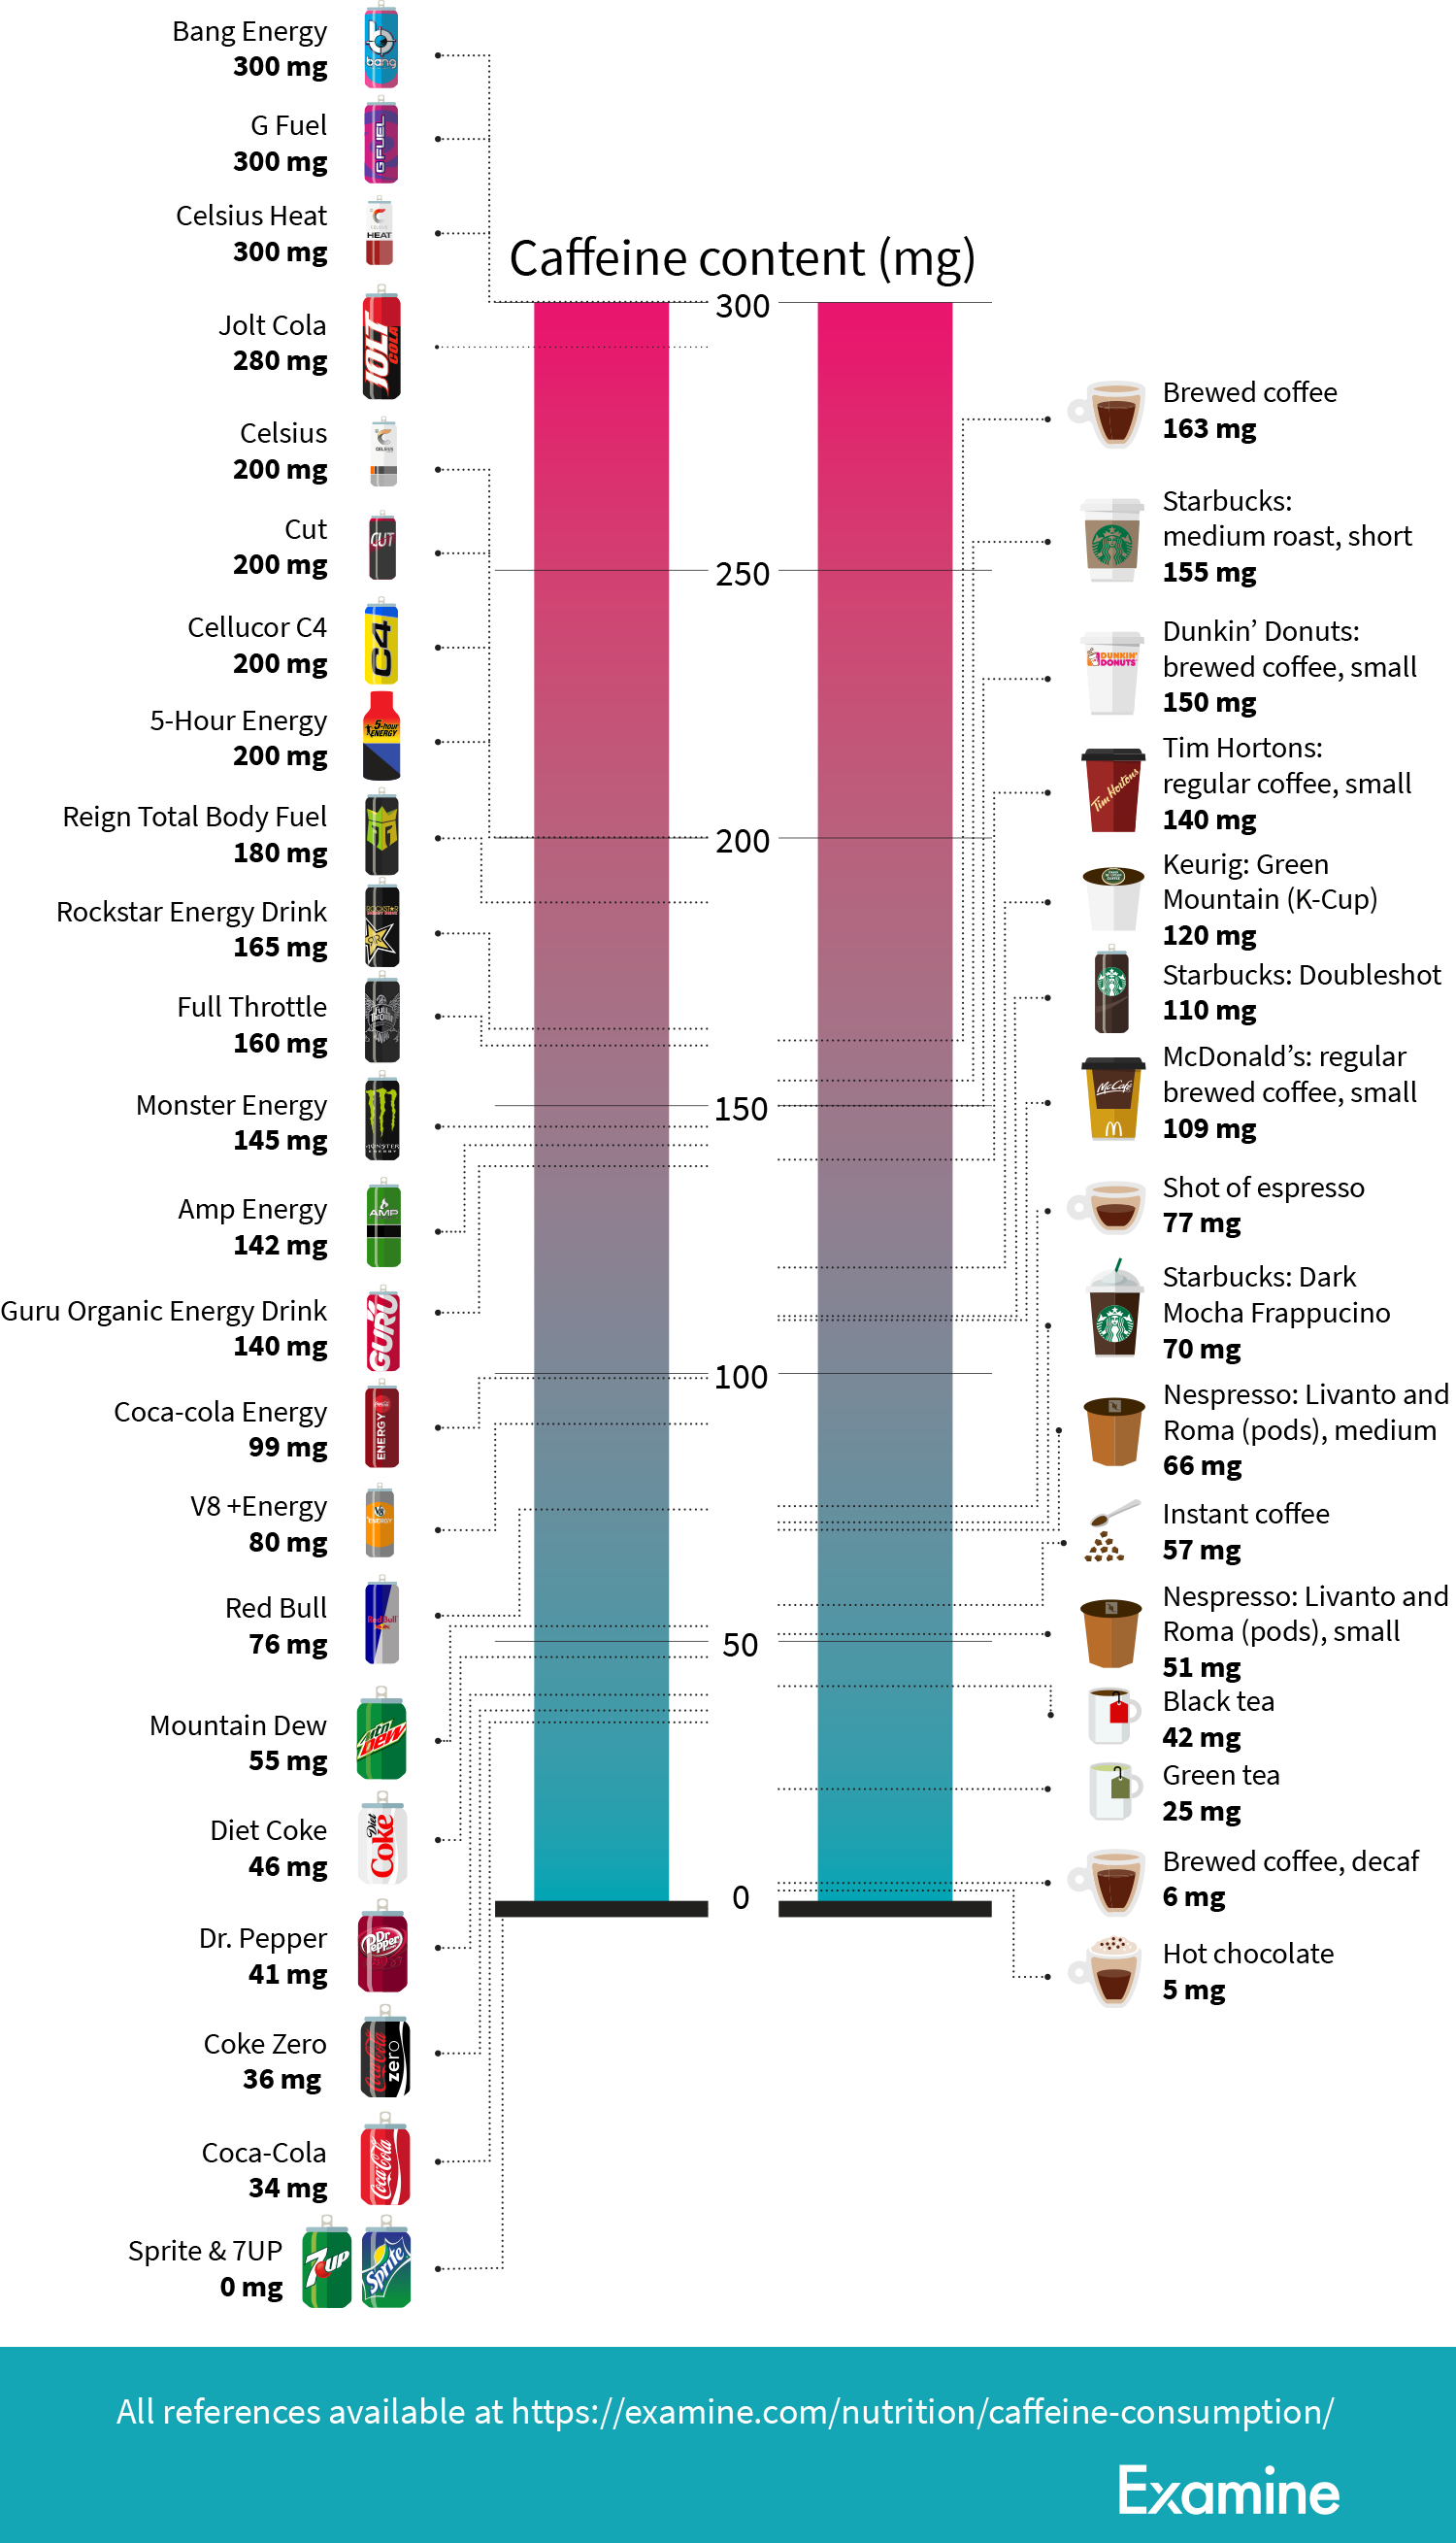 How much caffeine is too much? Article - Examine